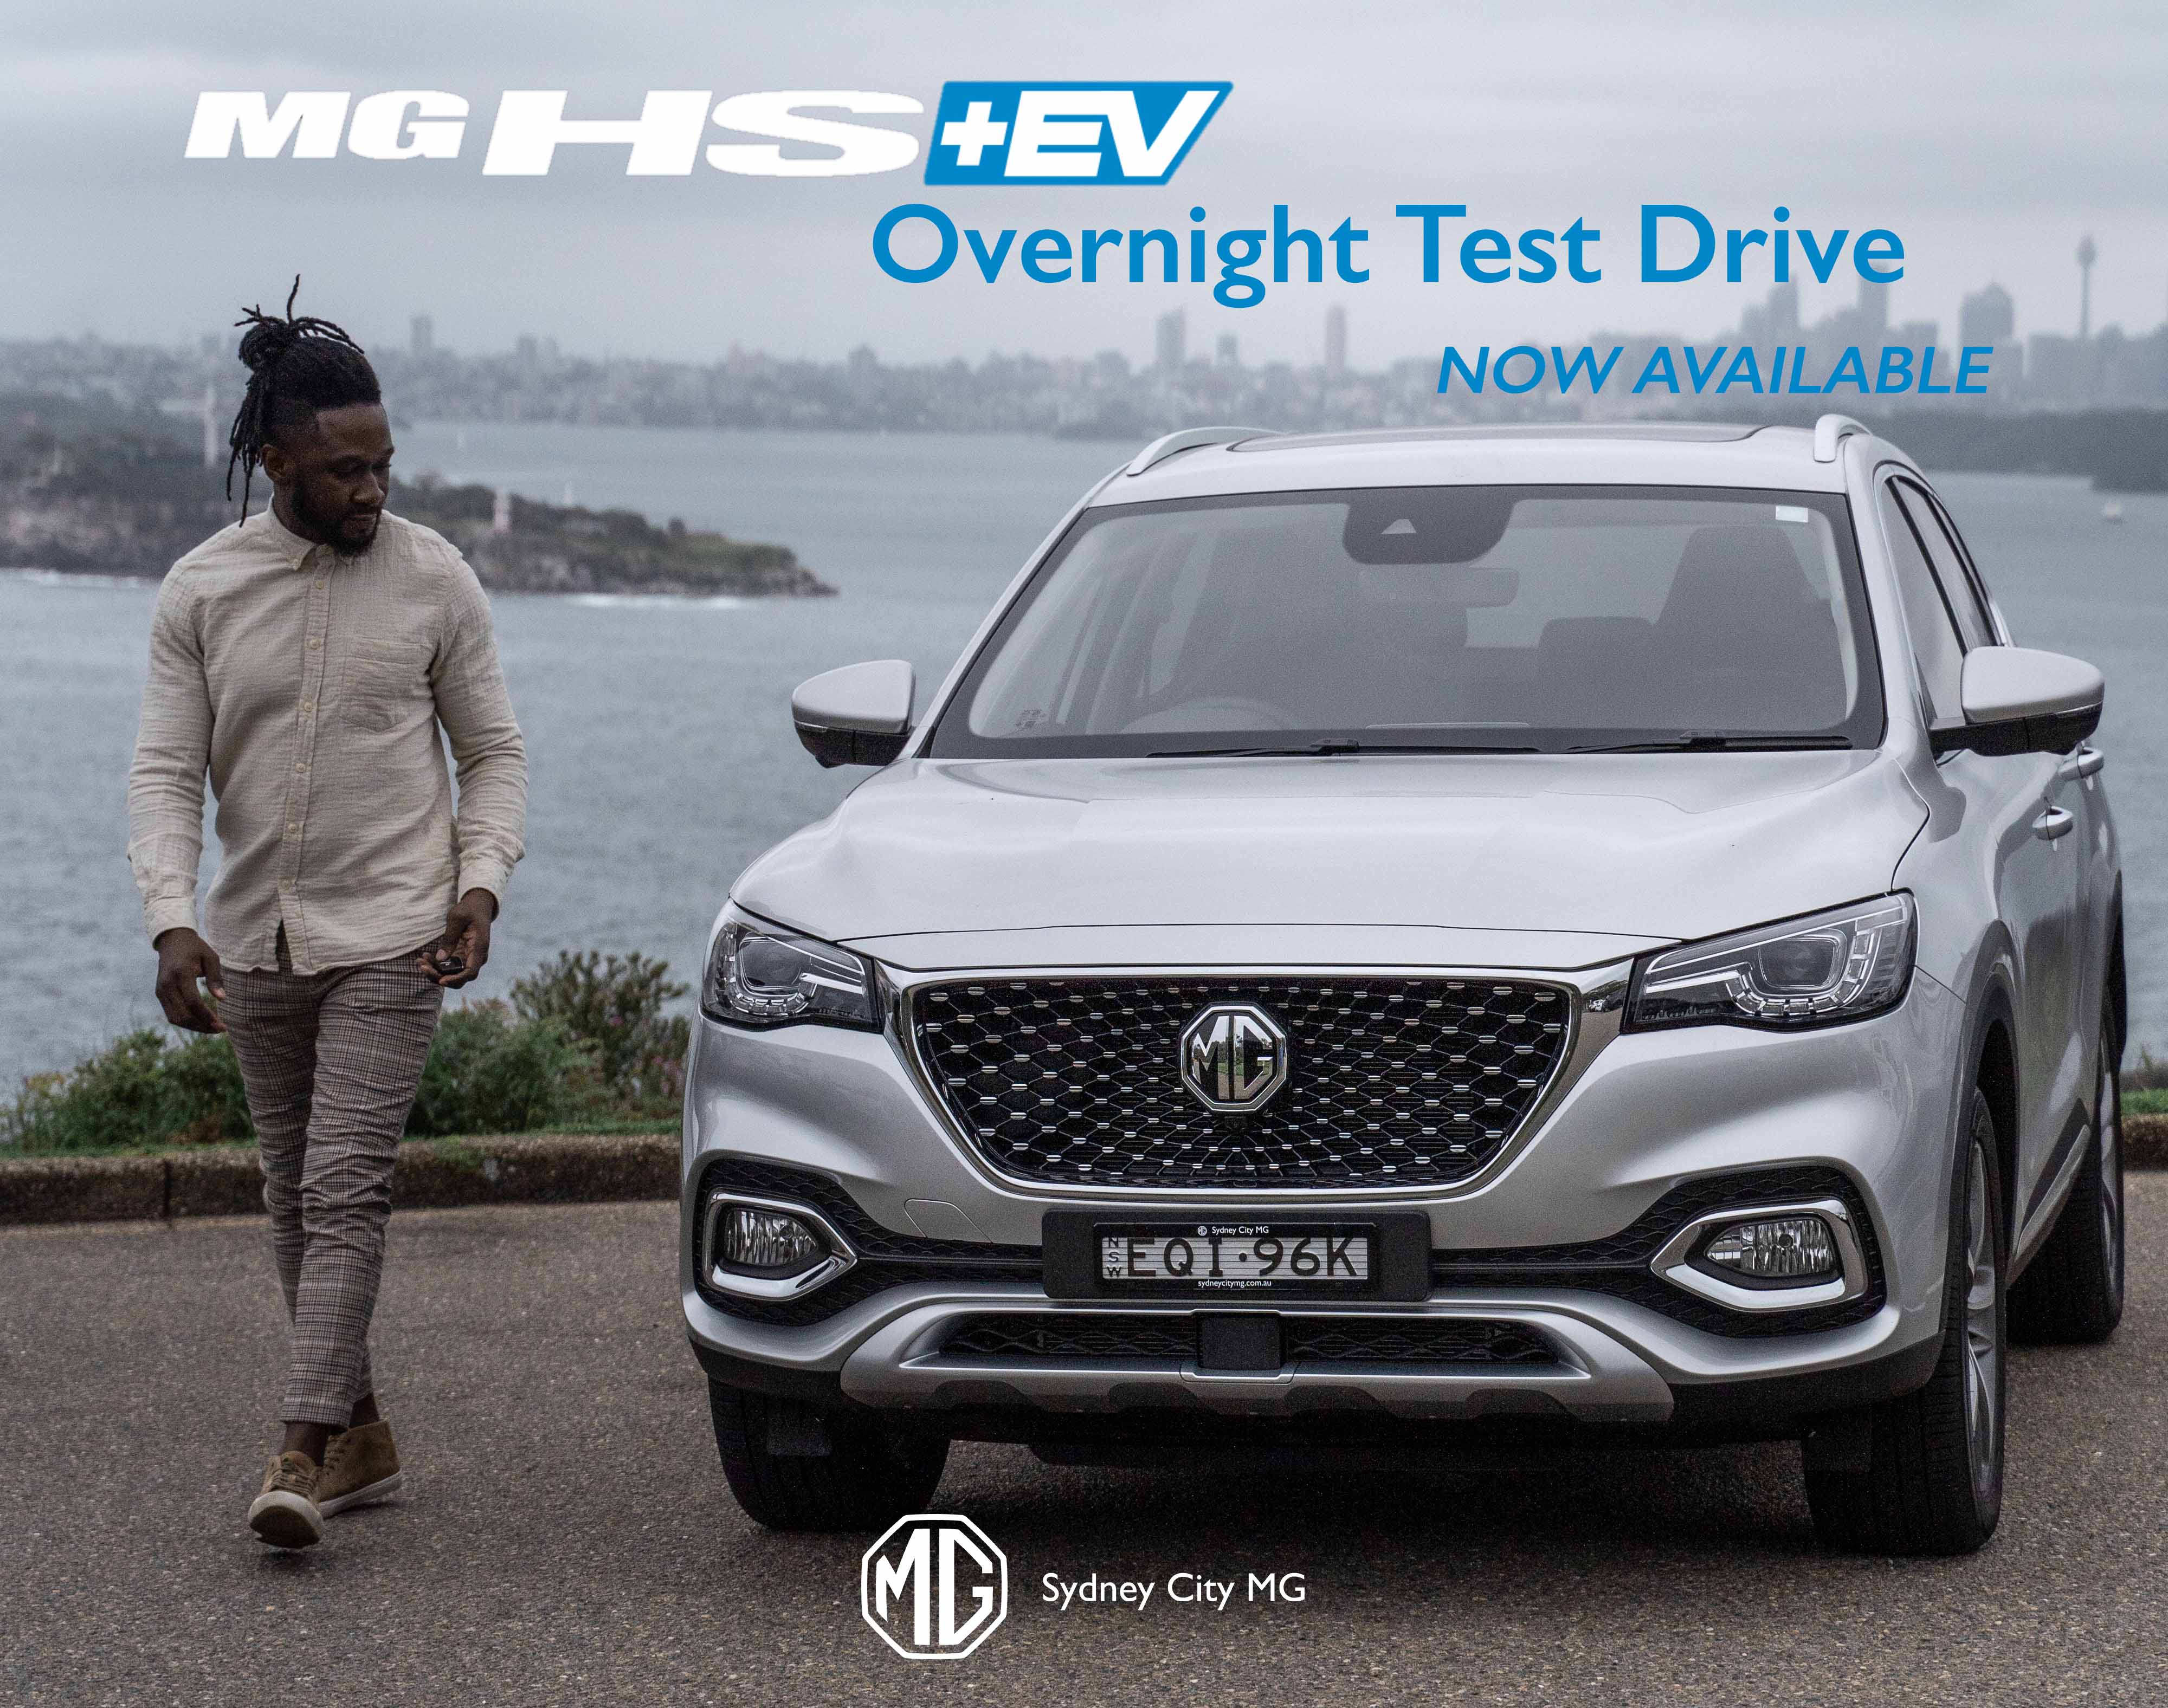 Overnight Test Drive with the MG HS Plus EV